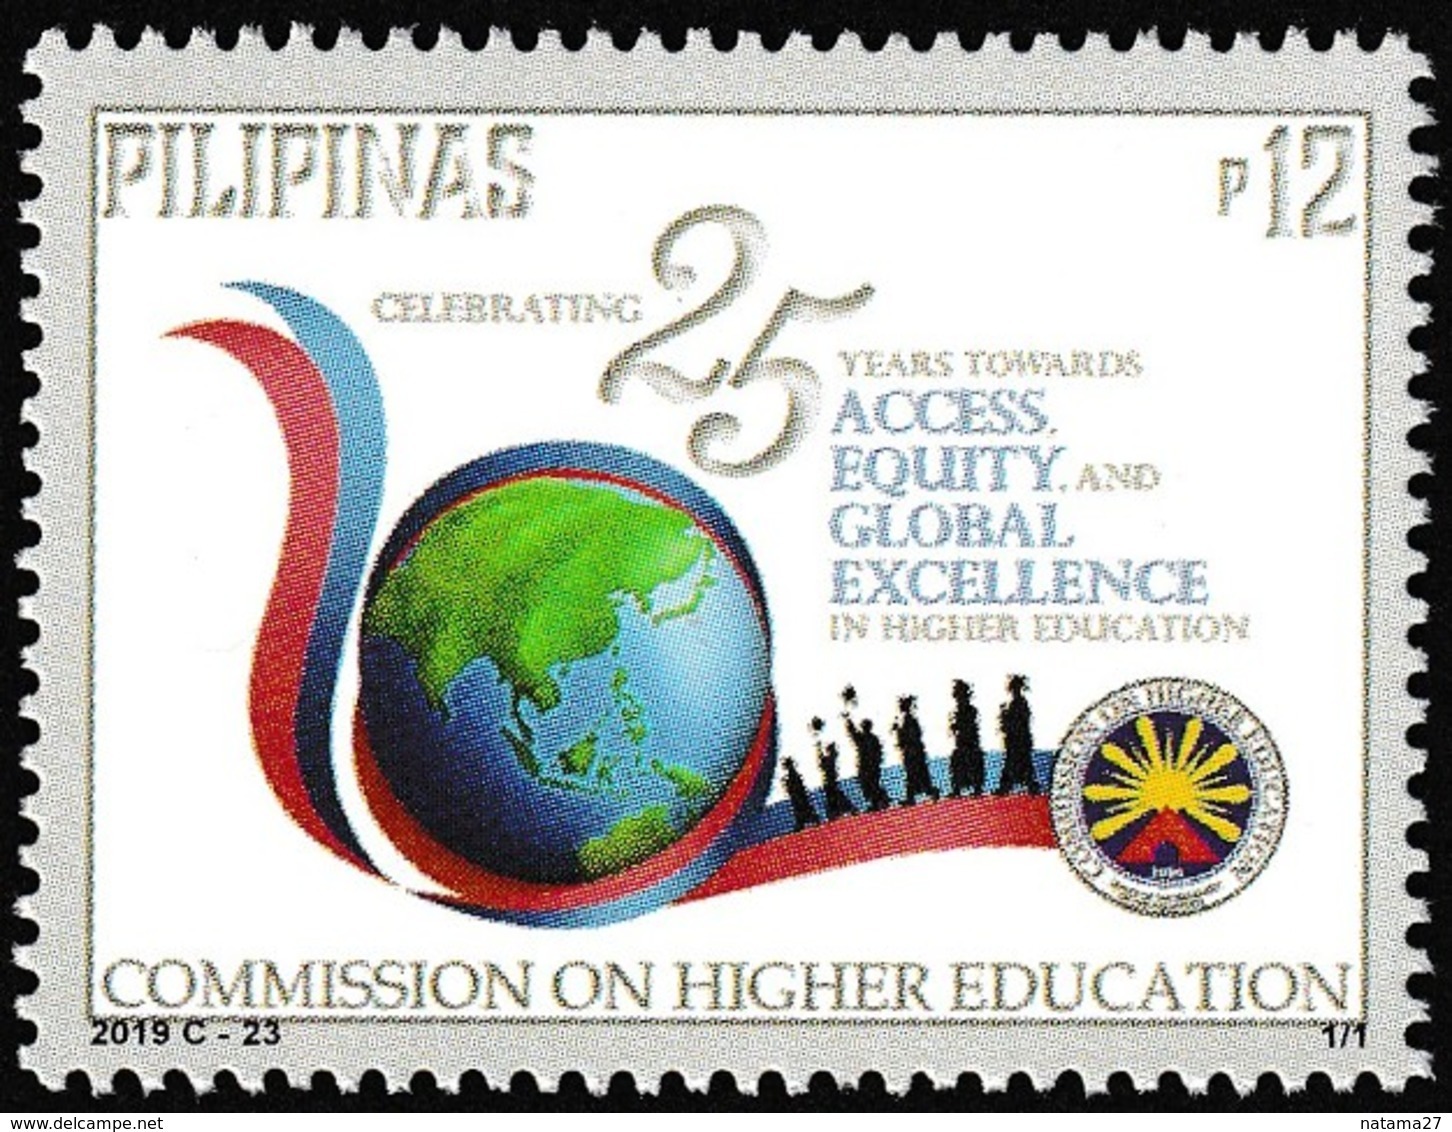 Filippine Philippines Philippinen Pilipinas 2019 Commission On Higher Education (CHED), 25th Anniversary Set - MNH** - Filippine